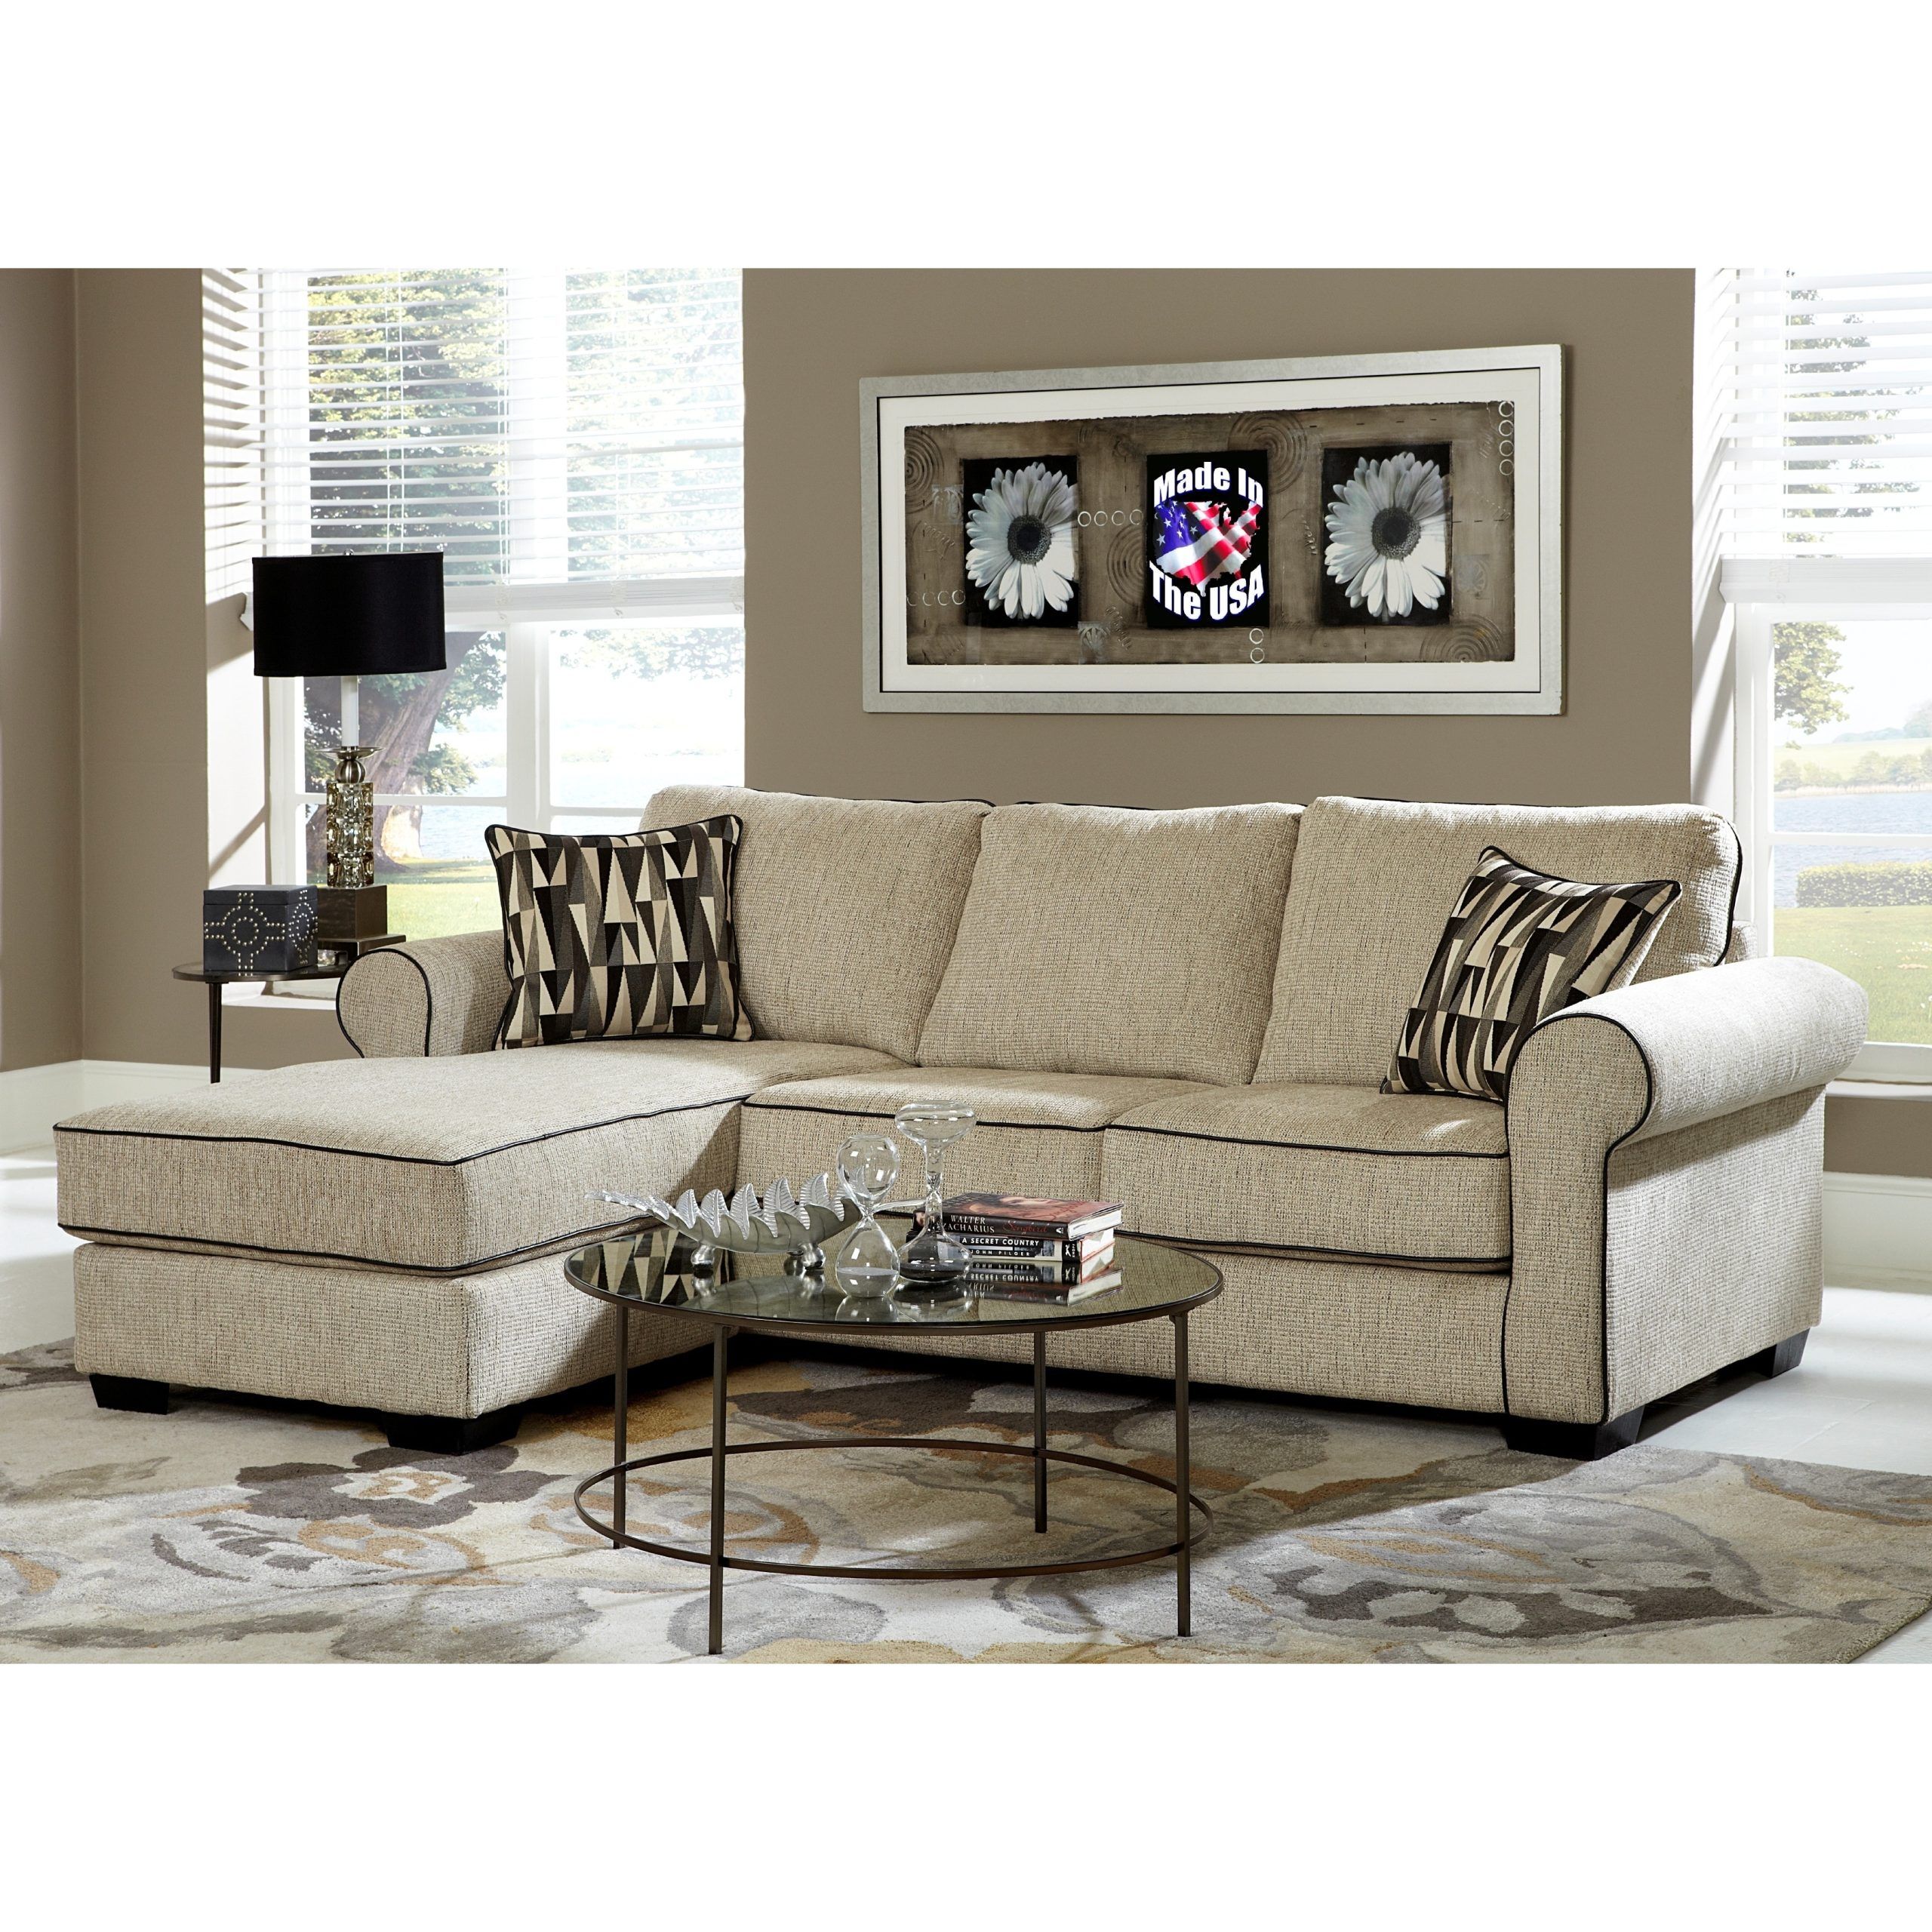 Shop Cream Chenille Reversible Sofa Chaise Sectional – Free Shipping With Regard To Chenille Sectional Sofas (View 9 of 20)